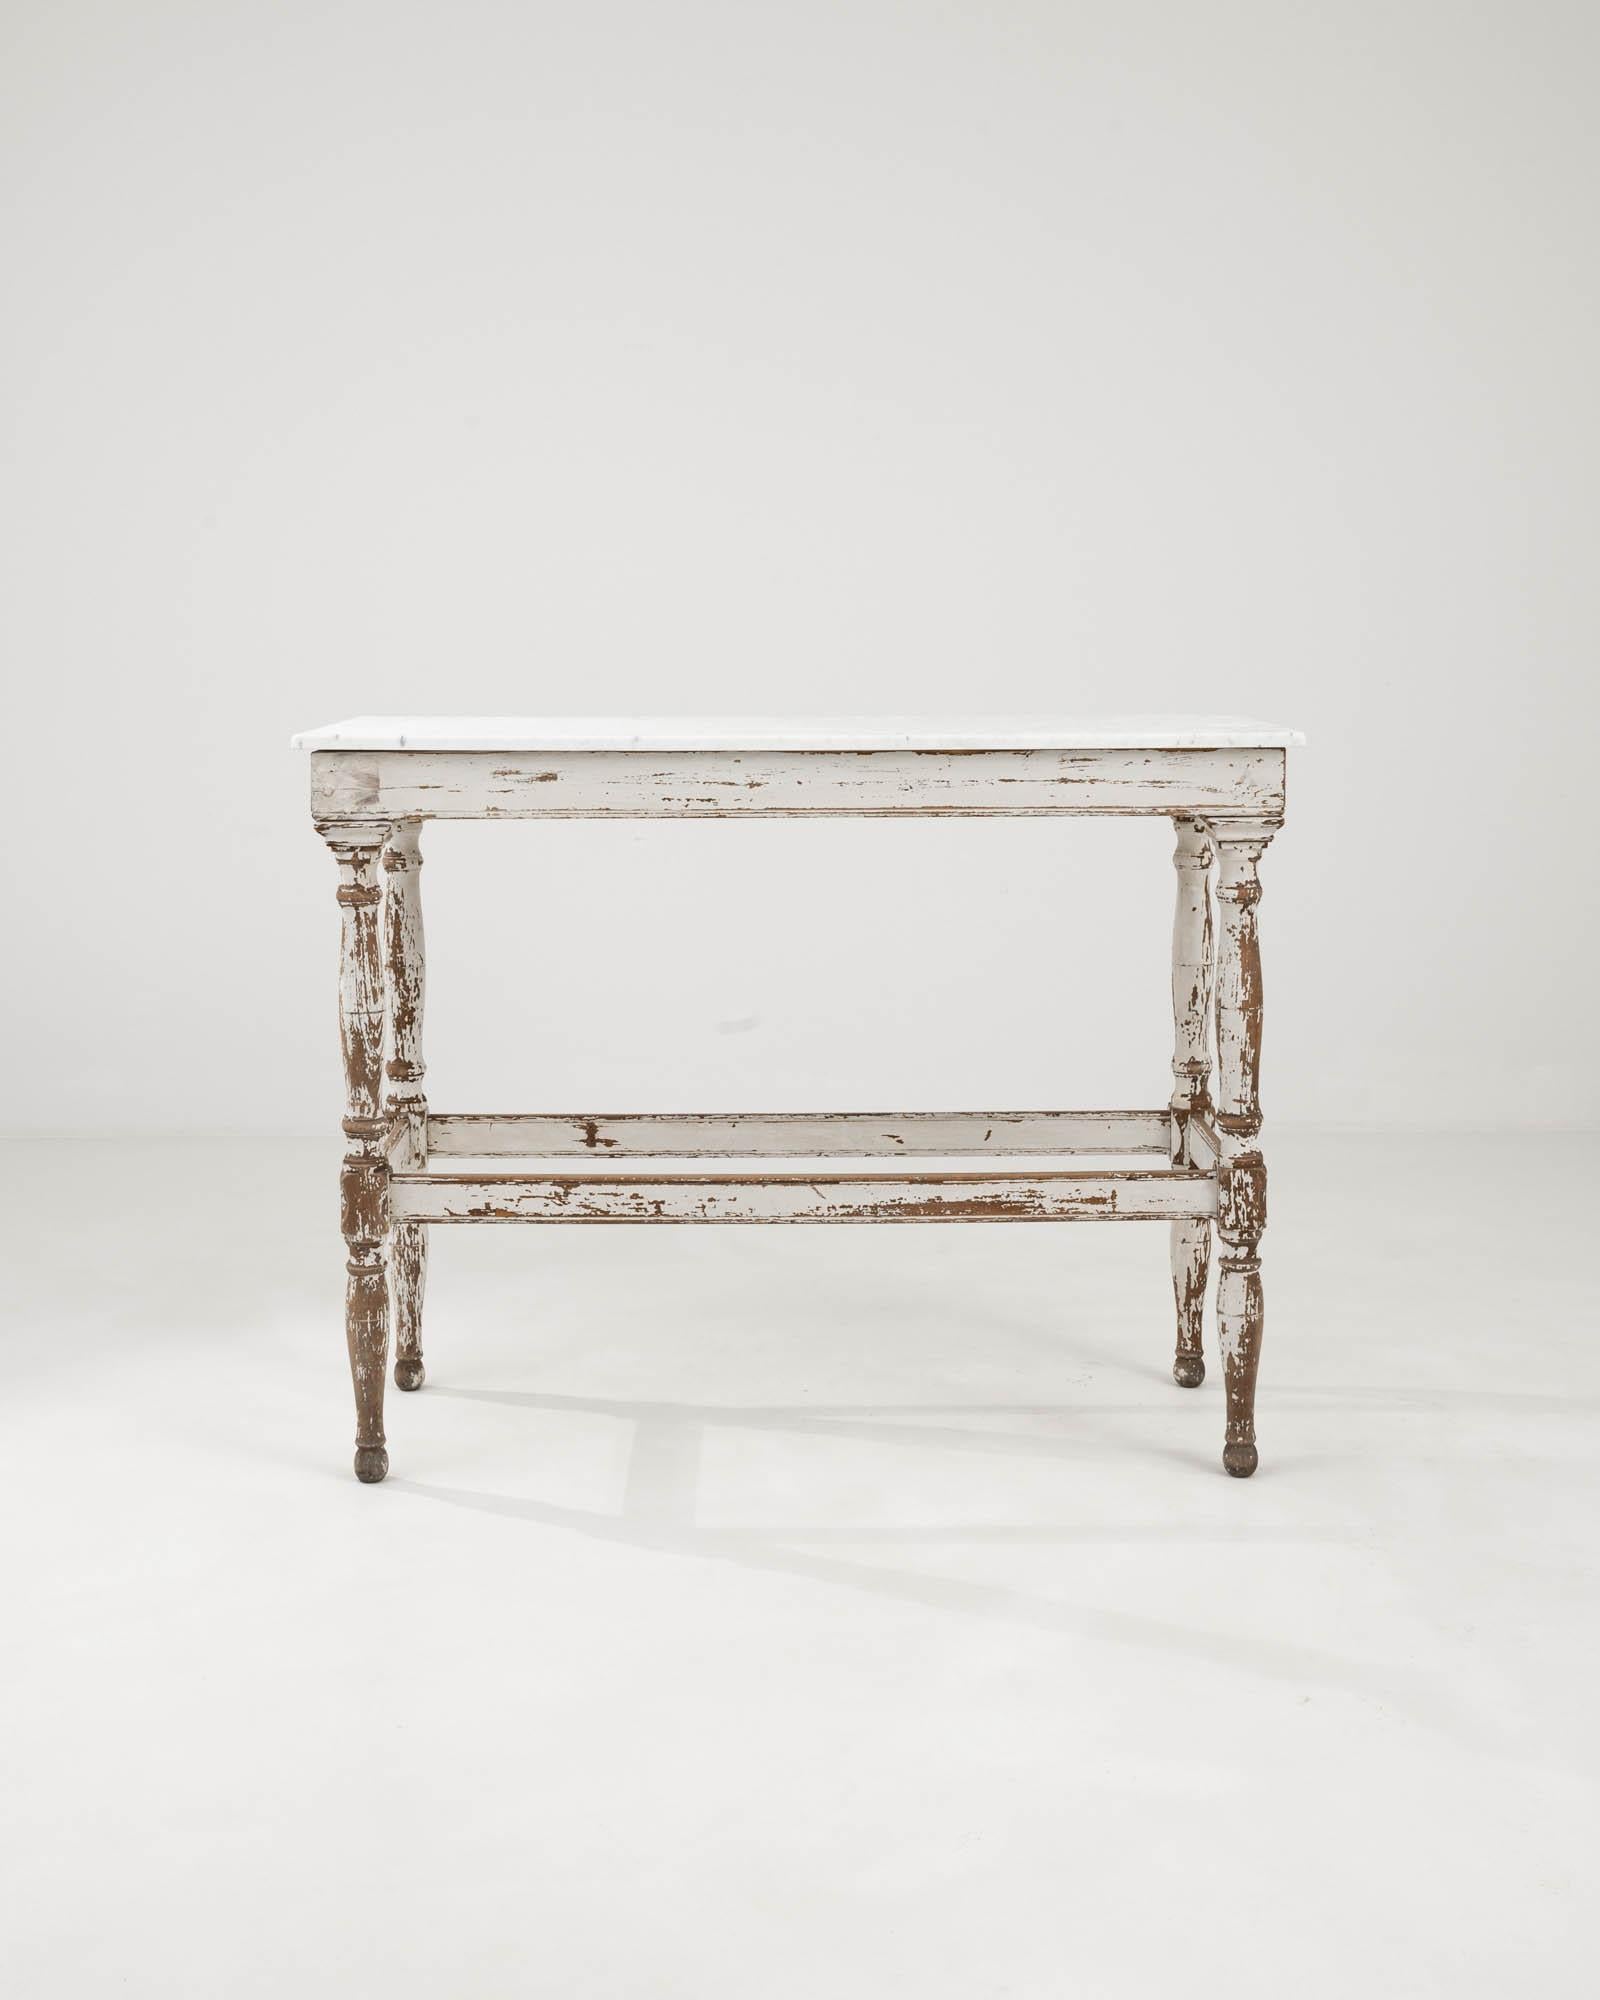 Step back in time with this exquisite 1900s French Wooden Console Table, a true gem for antique lovers and connoisseurs of timeless style. Its robust wooden frame boasts a history-rich, distressed finish that tells a tale of a century gone by, while